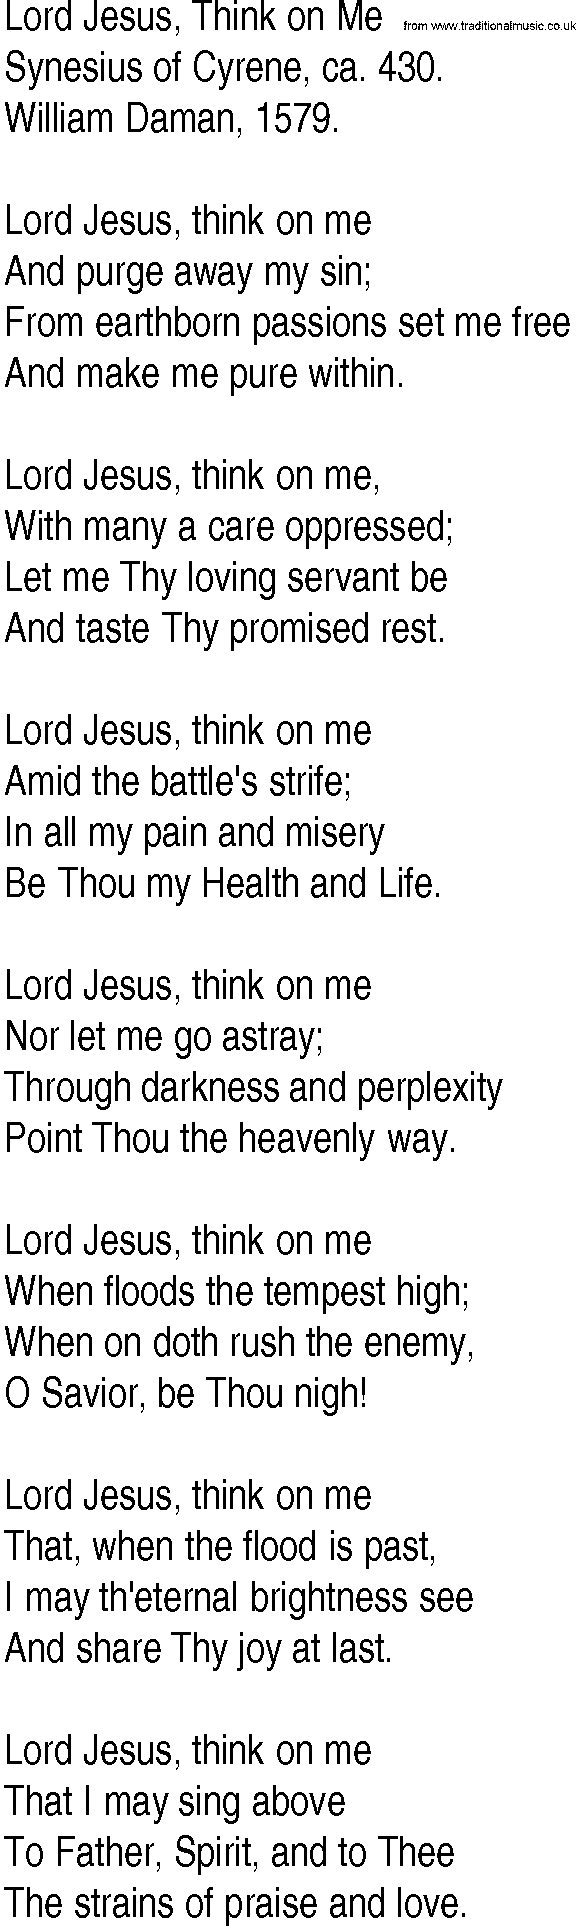 Hymn and Gospel Song: Lord Jesus, Think on Me by Synesius of Cyrene ca lyrics